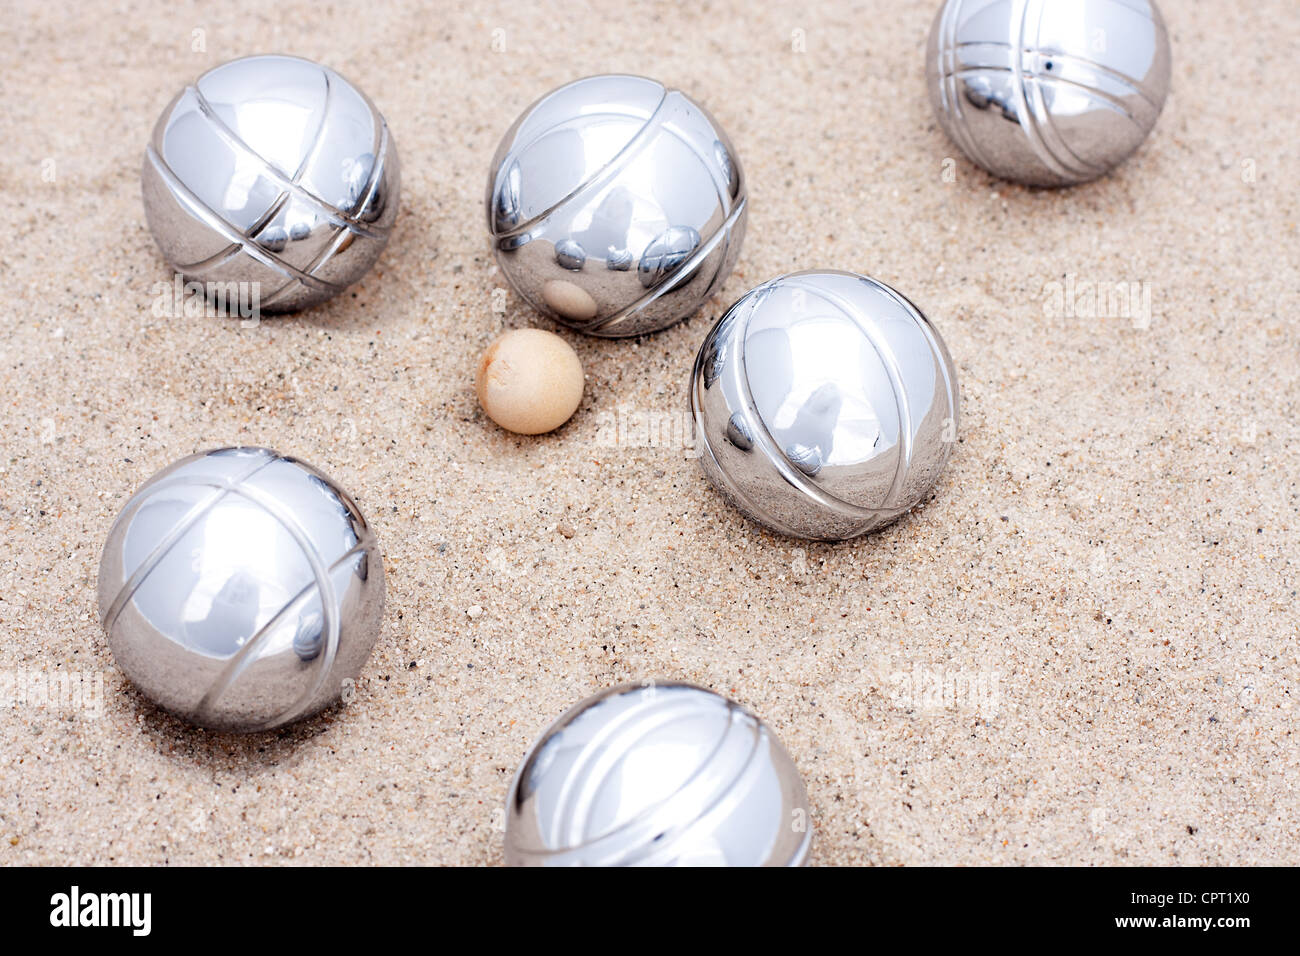 Boule balls Black and White Stock Photos & Images - Alamy